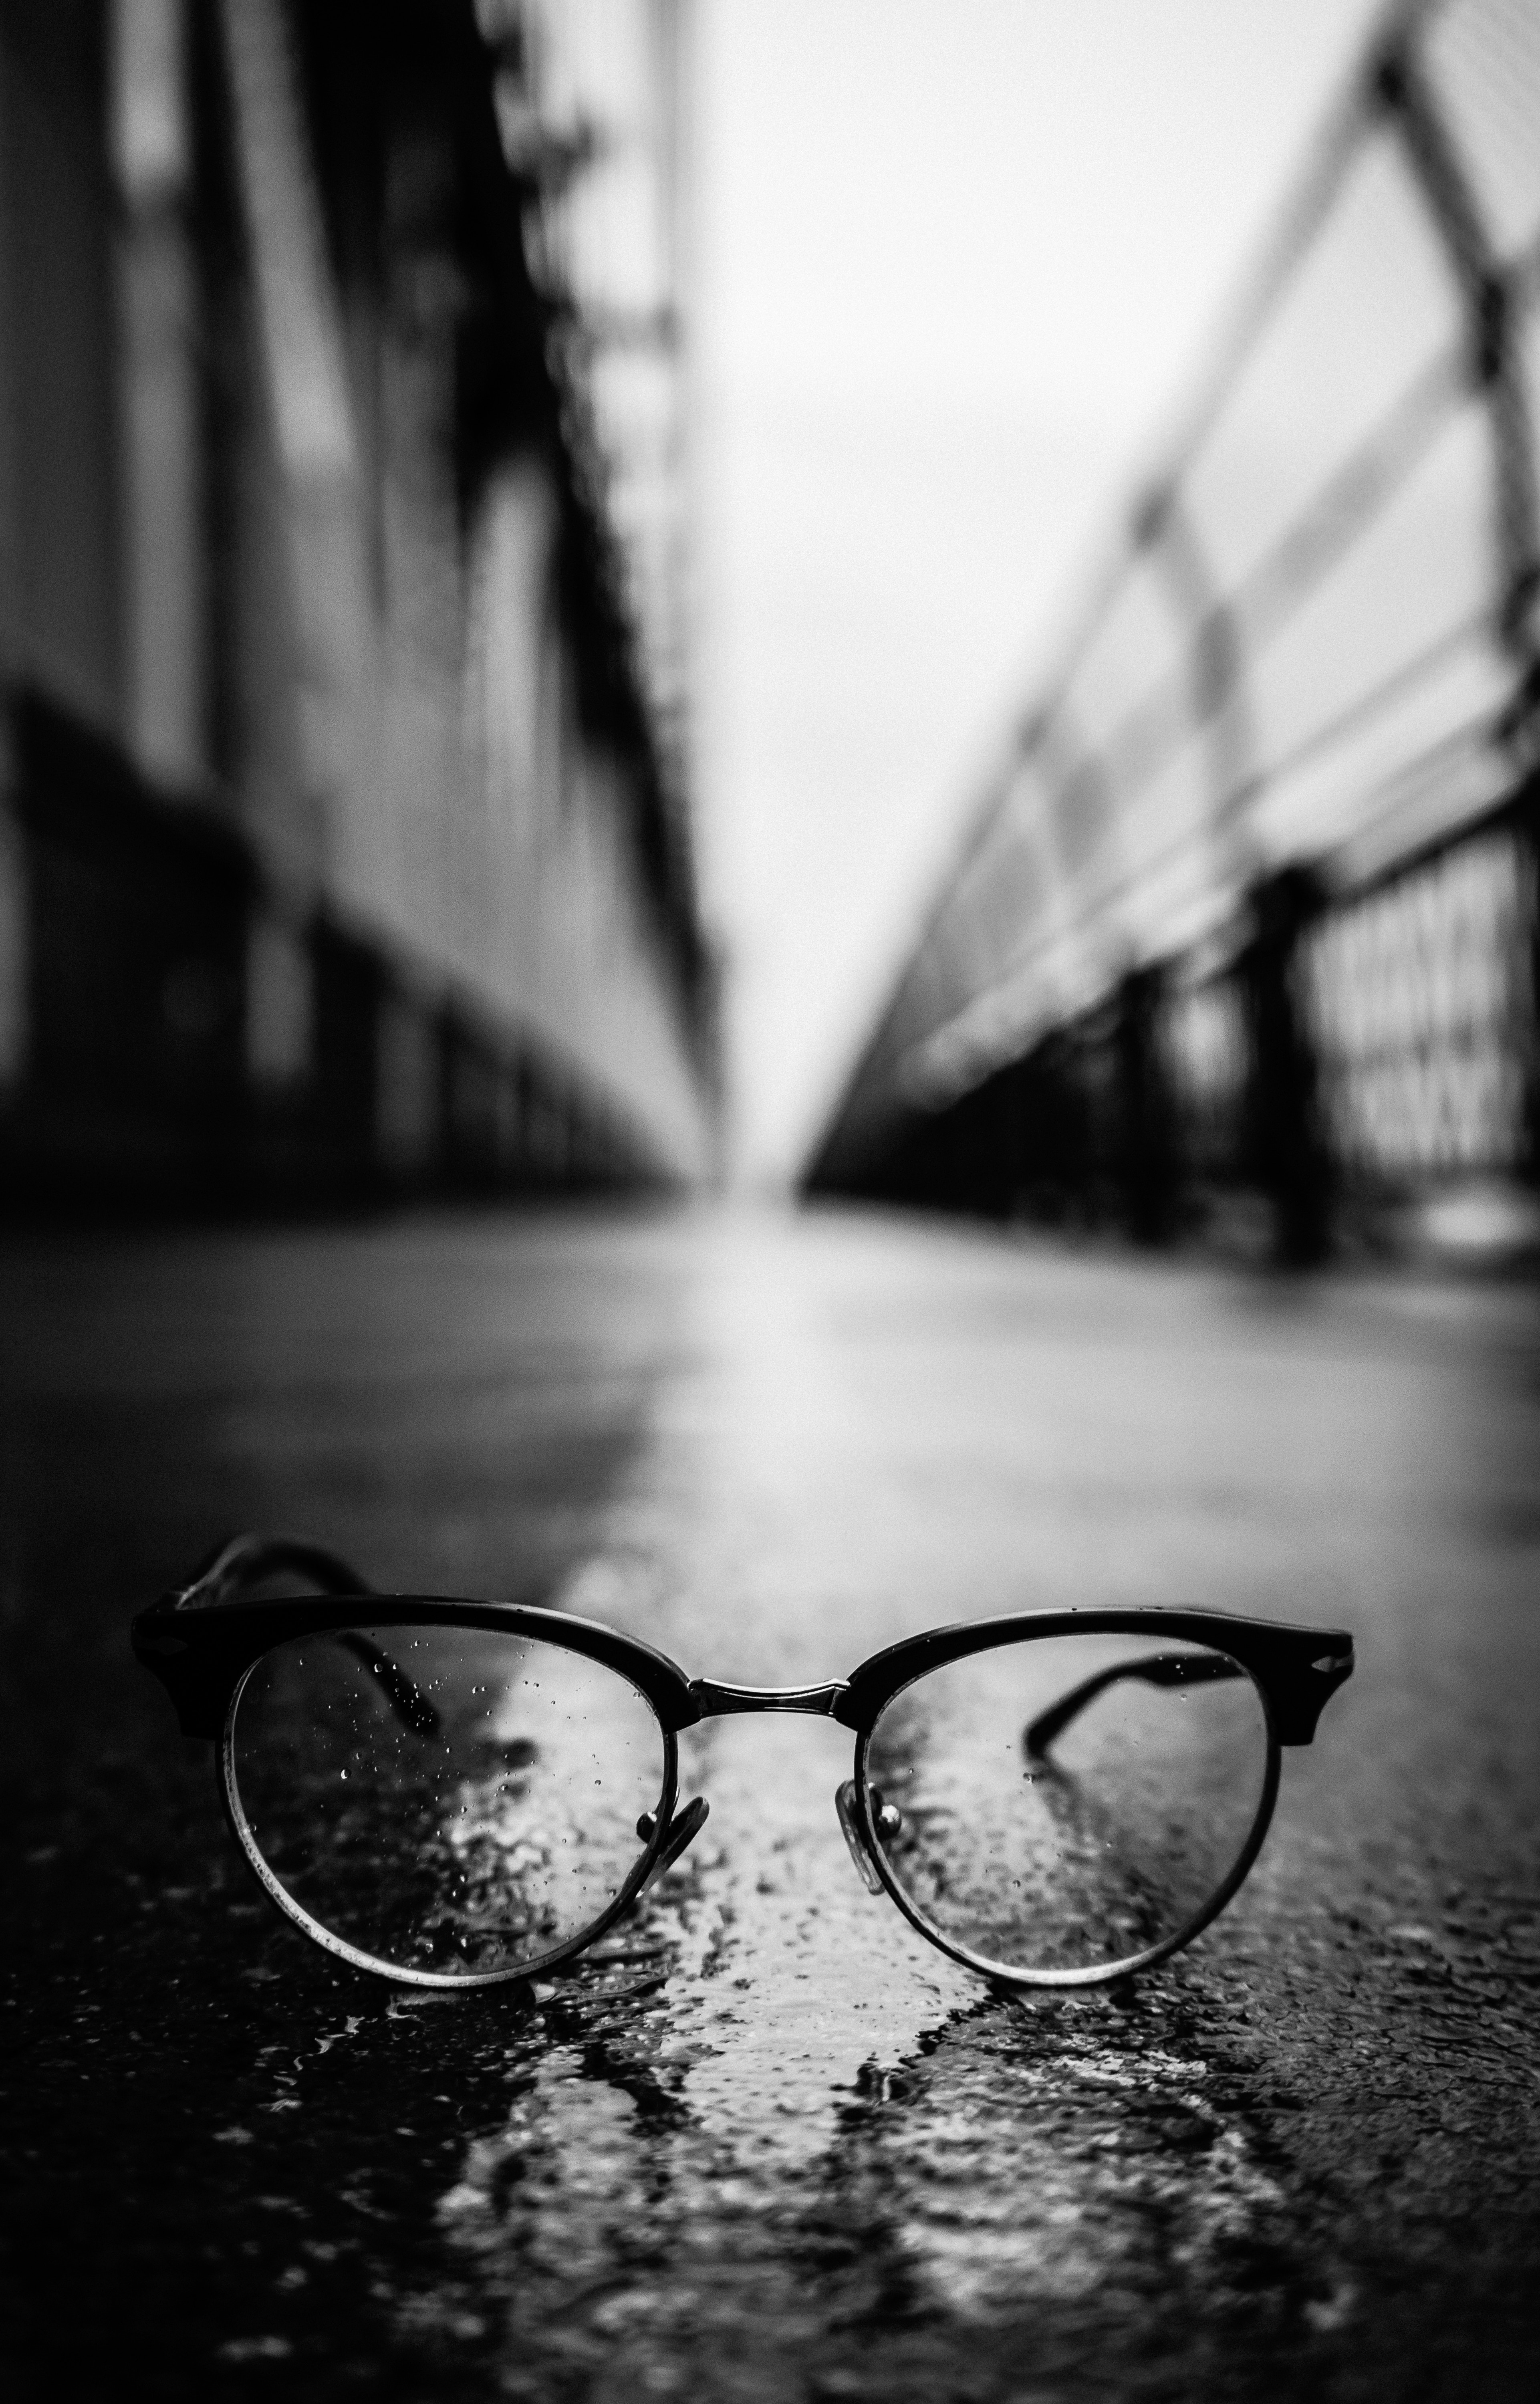 bw, close up, dark, chb, glasses, spectacles HD wallpaper